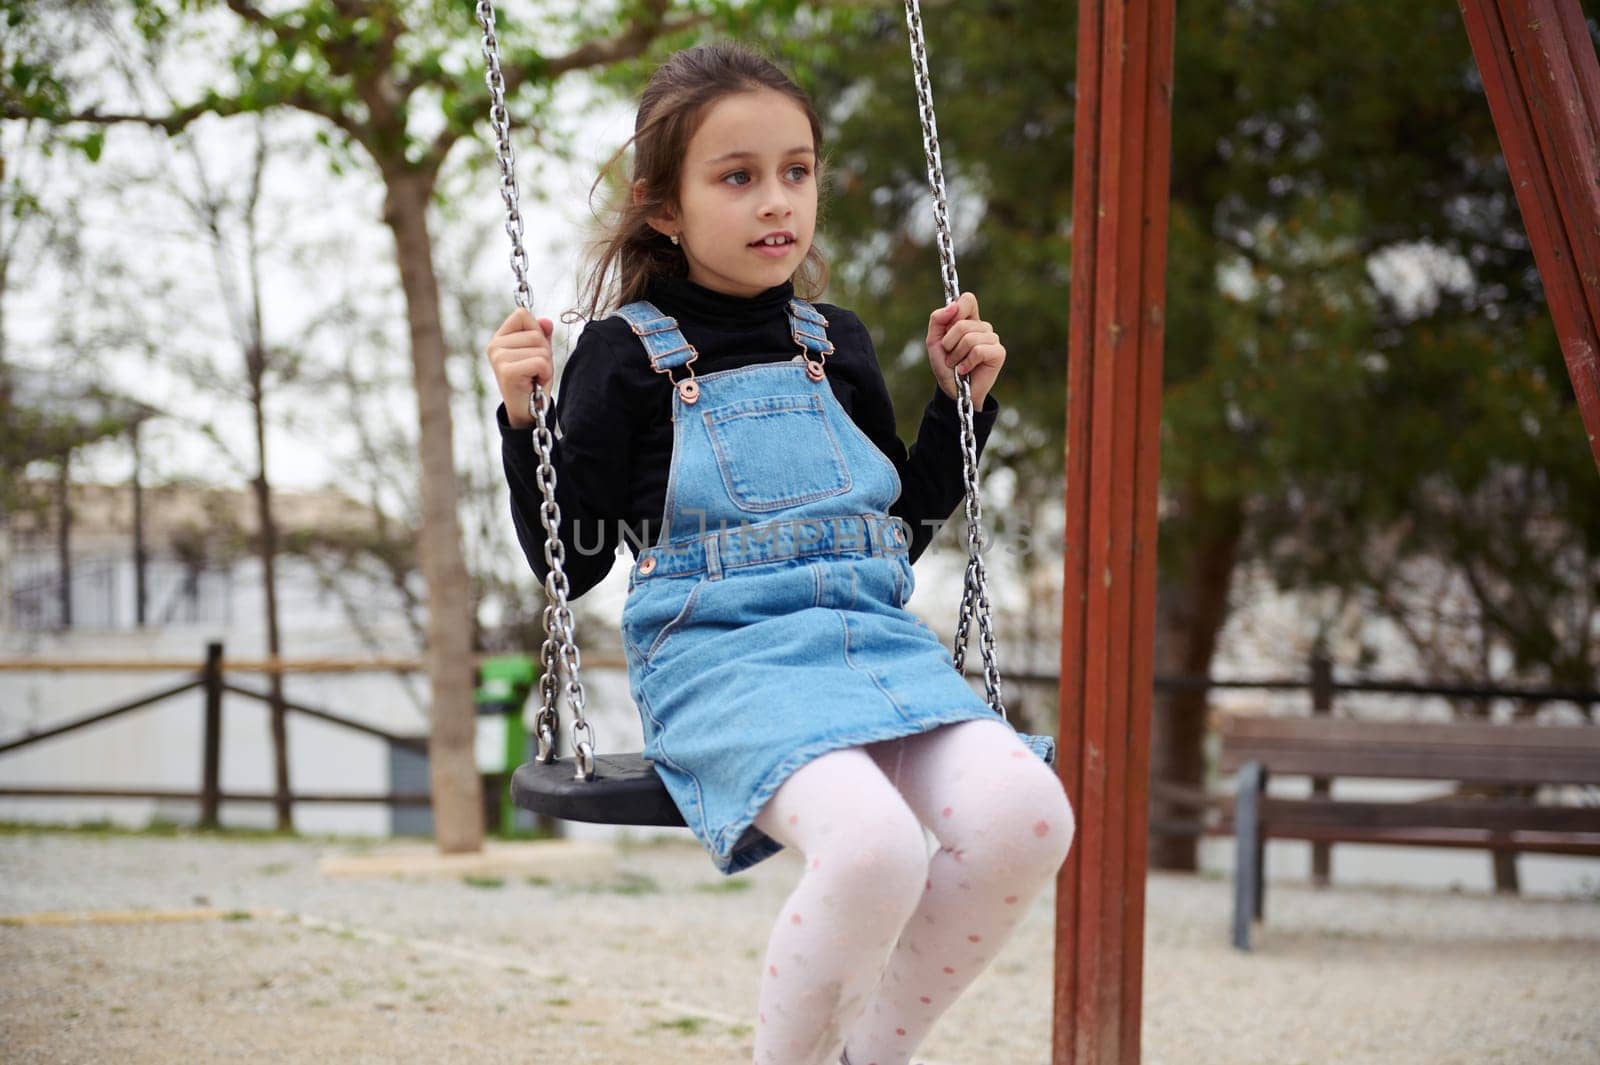 European cute child girl swinging on the outdoors playground. People. Happy carefree childhood concept. Lifestyle